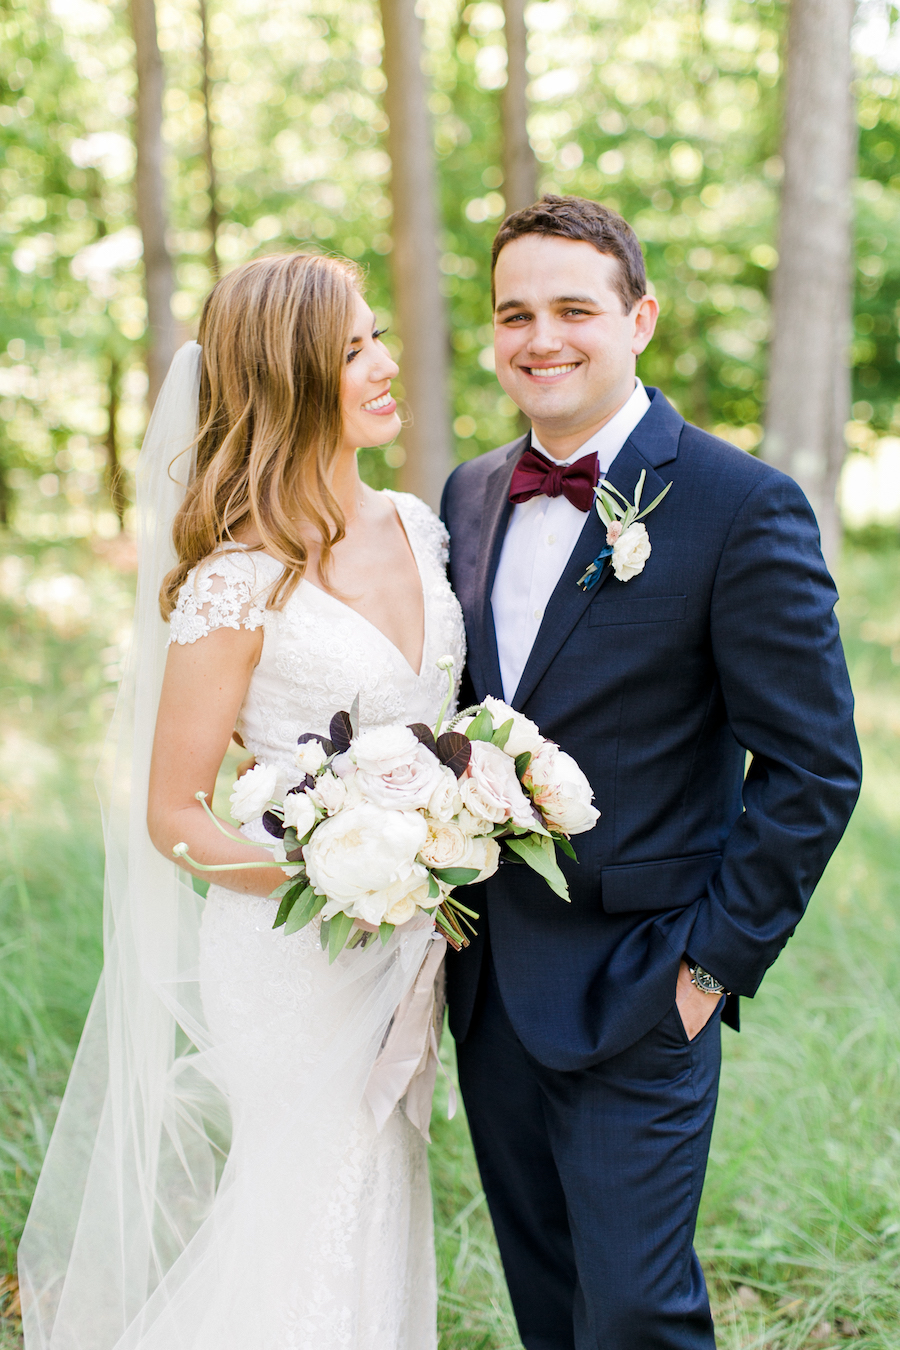 A bride and a groom smiling on their wedding day